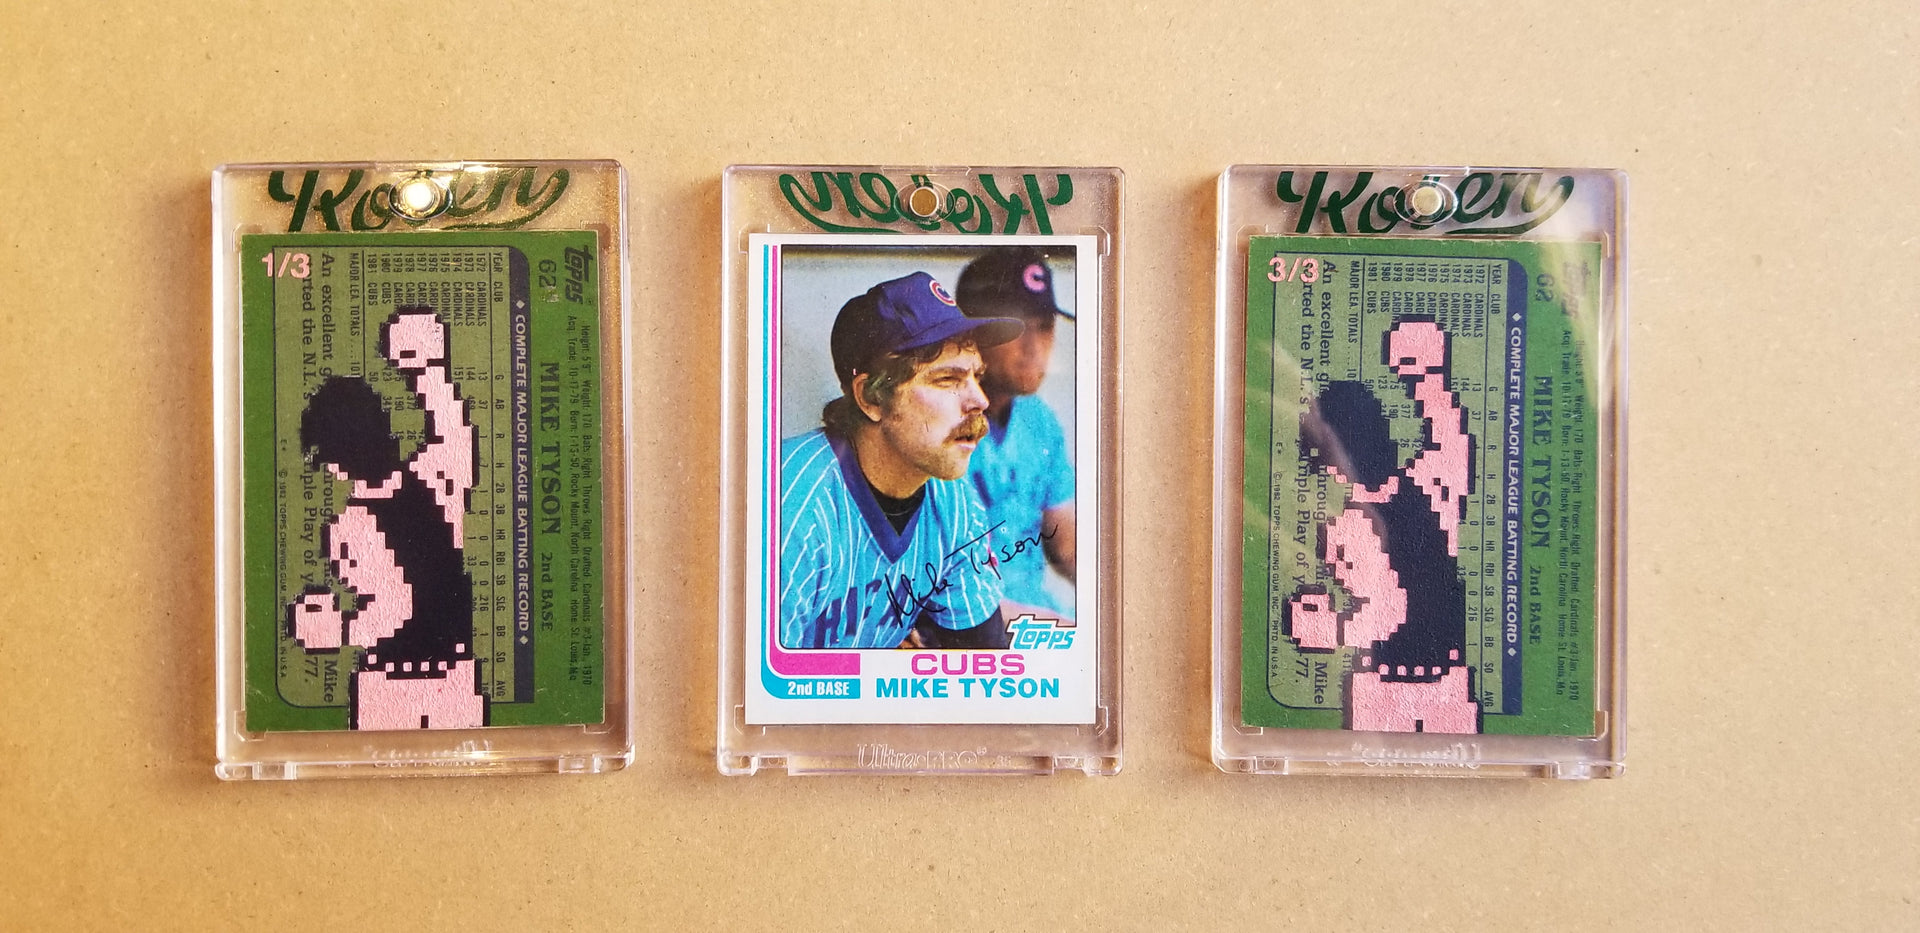 Buhner Seinfeld Triptych